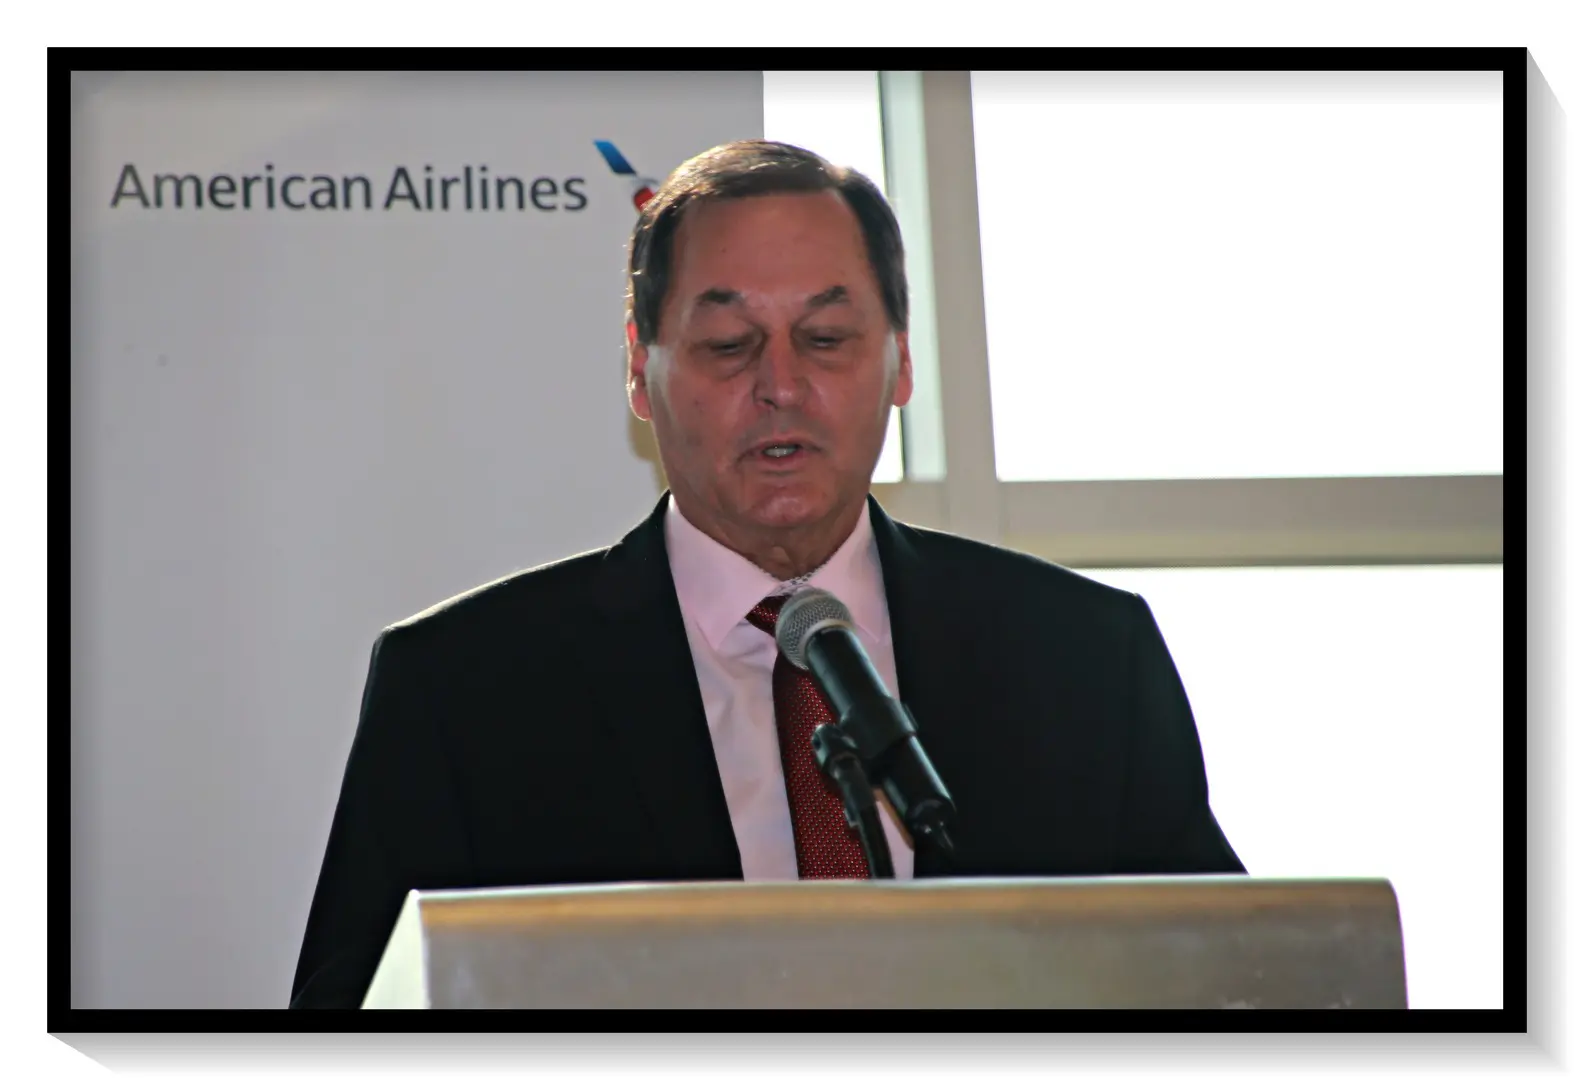 A man standing at a podium in front of an american airlines sign.